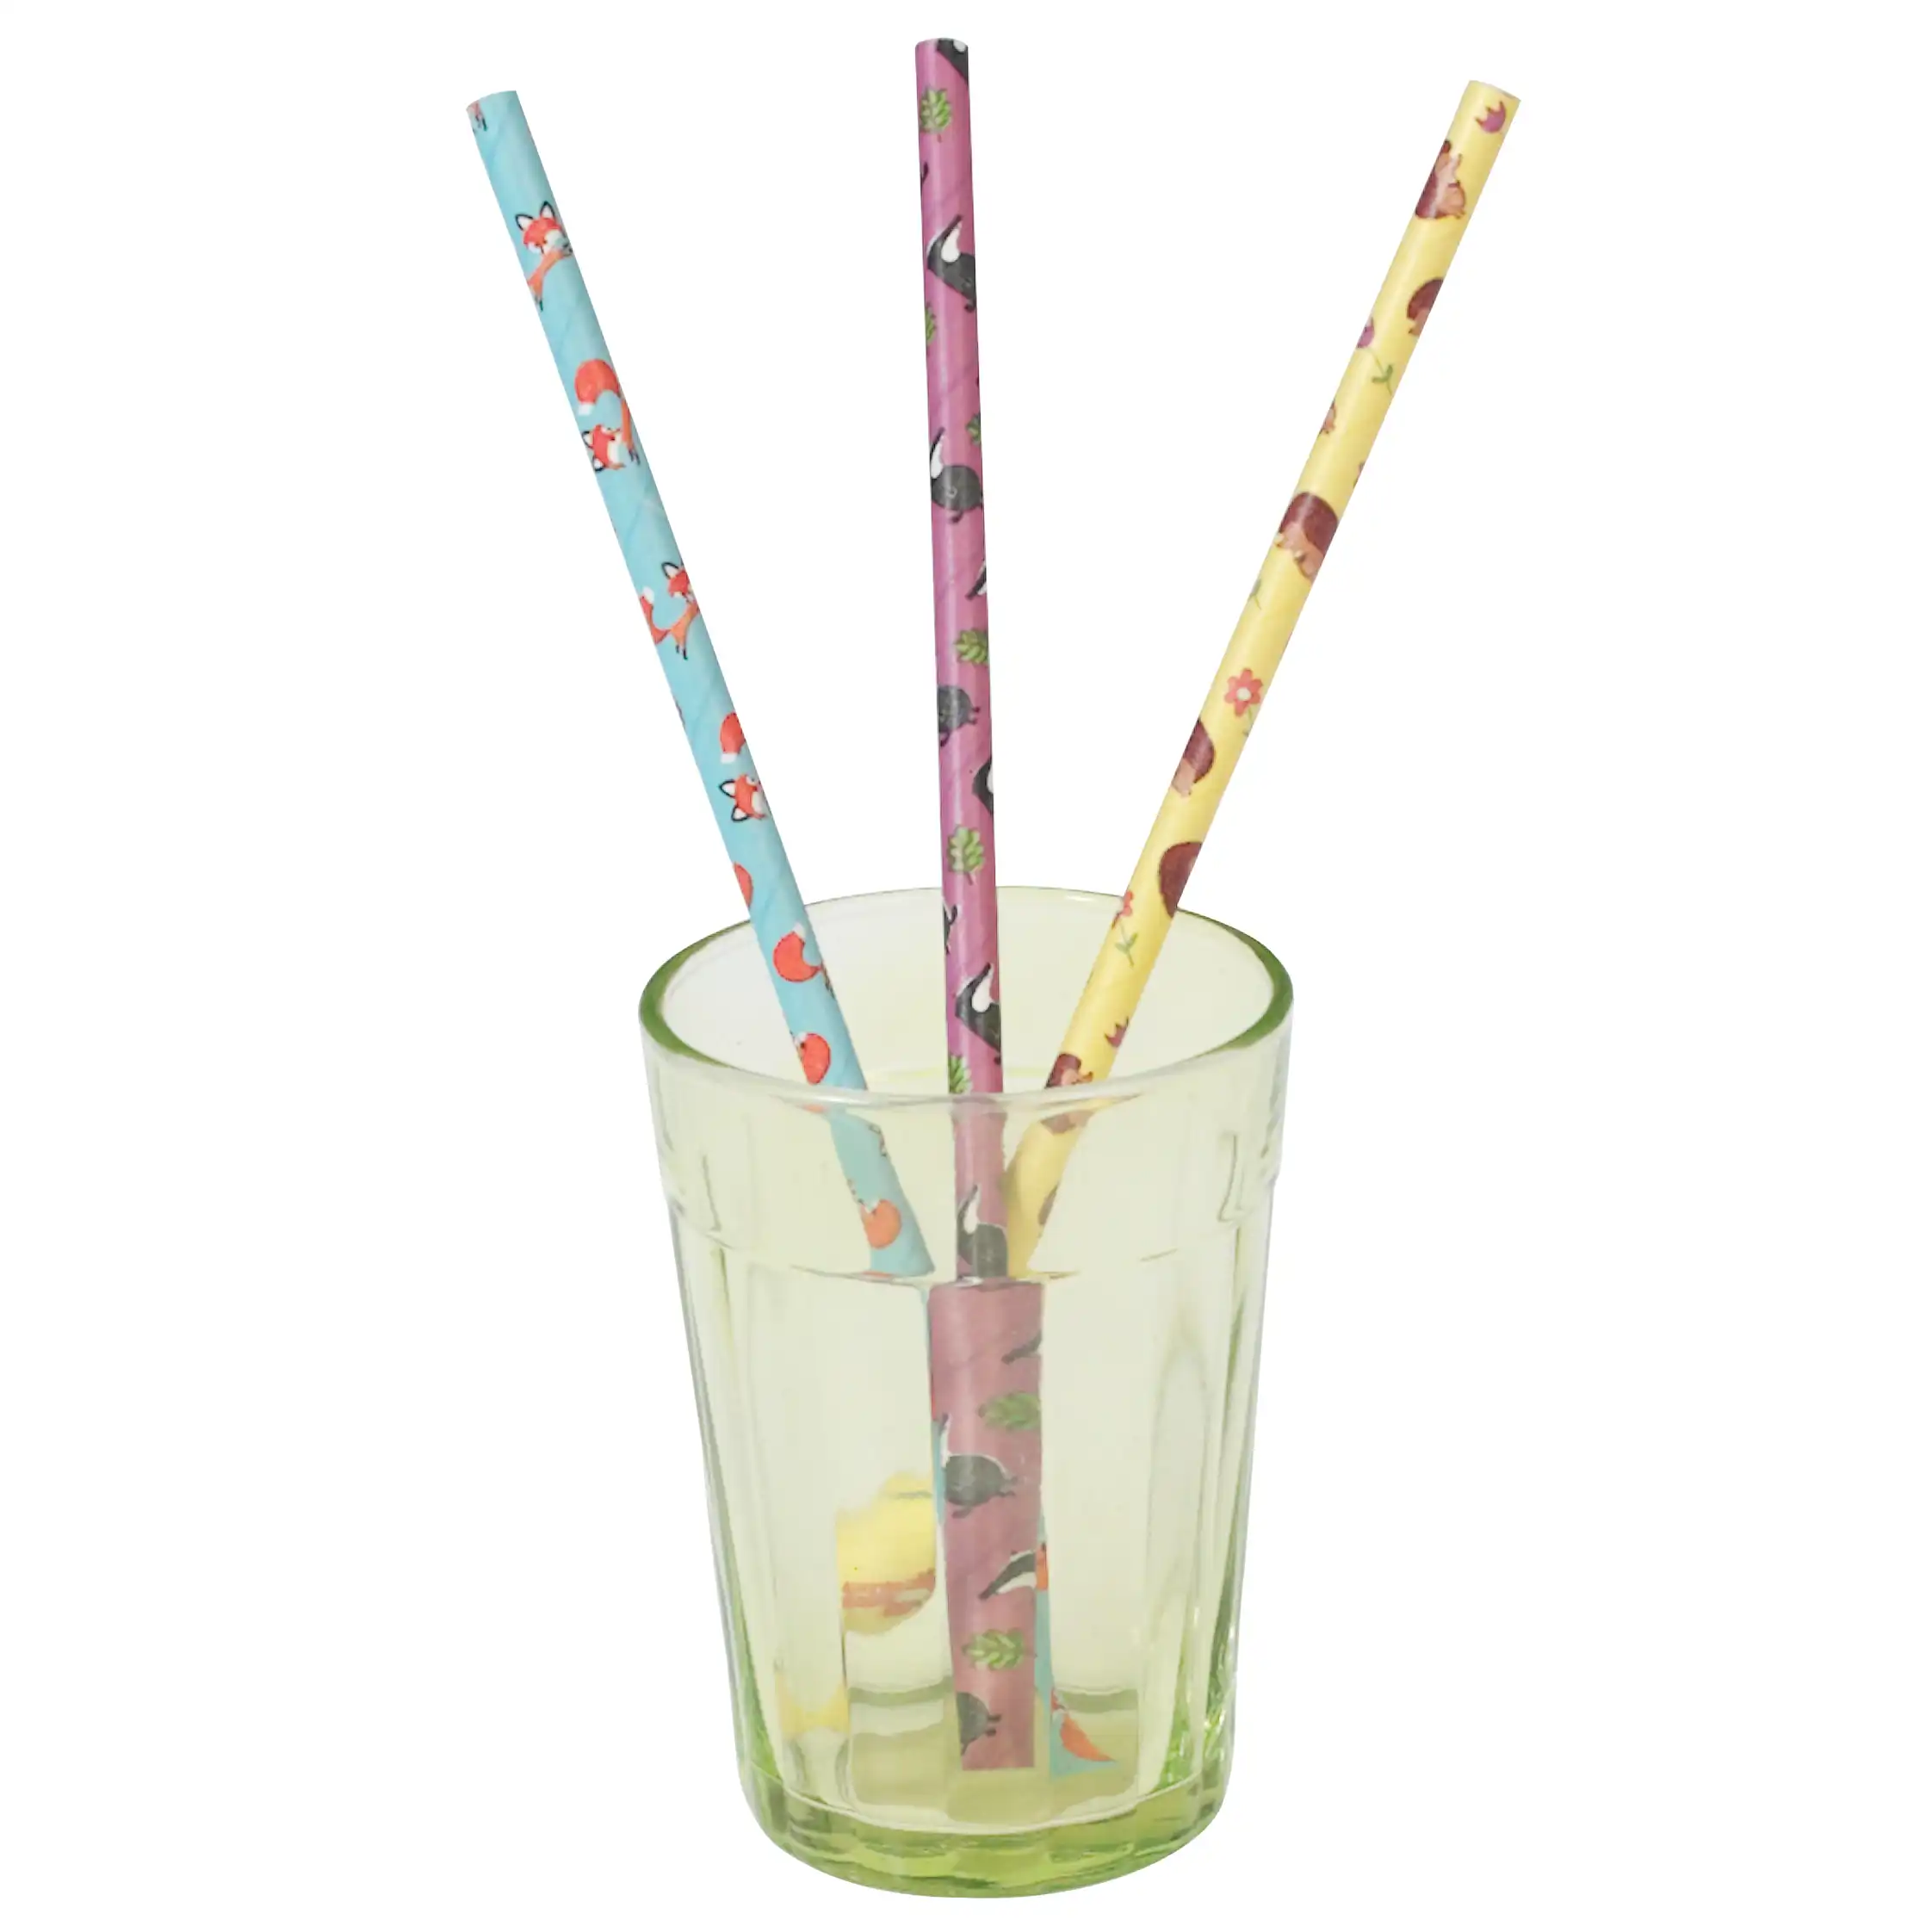 paper straws (pack of 25) - rusty and friends